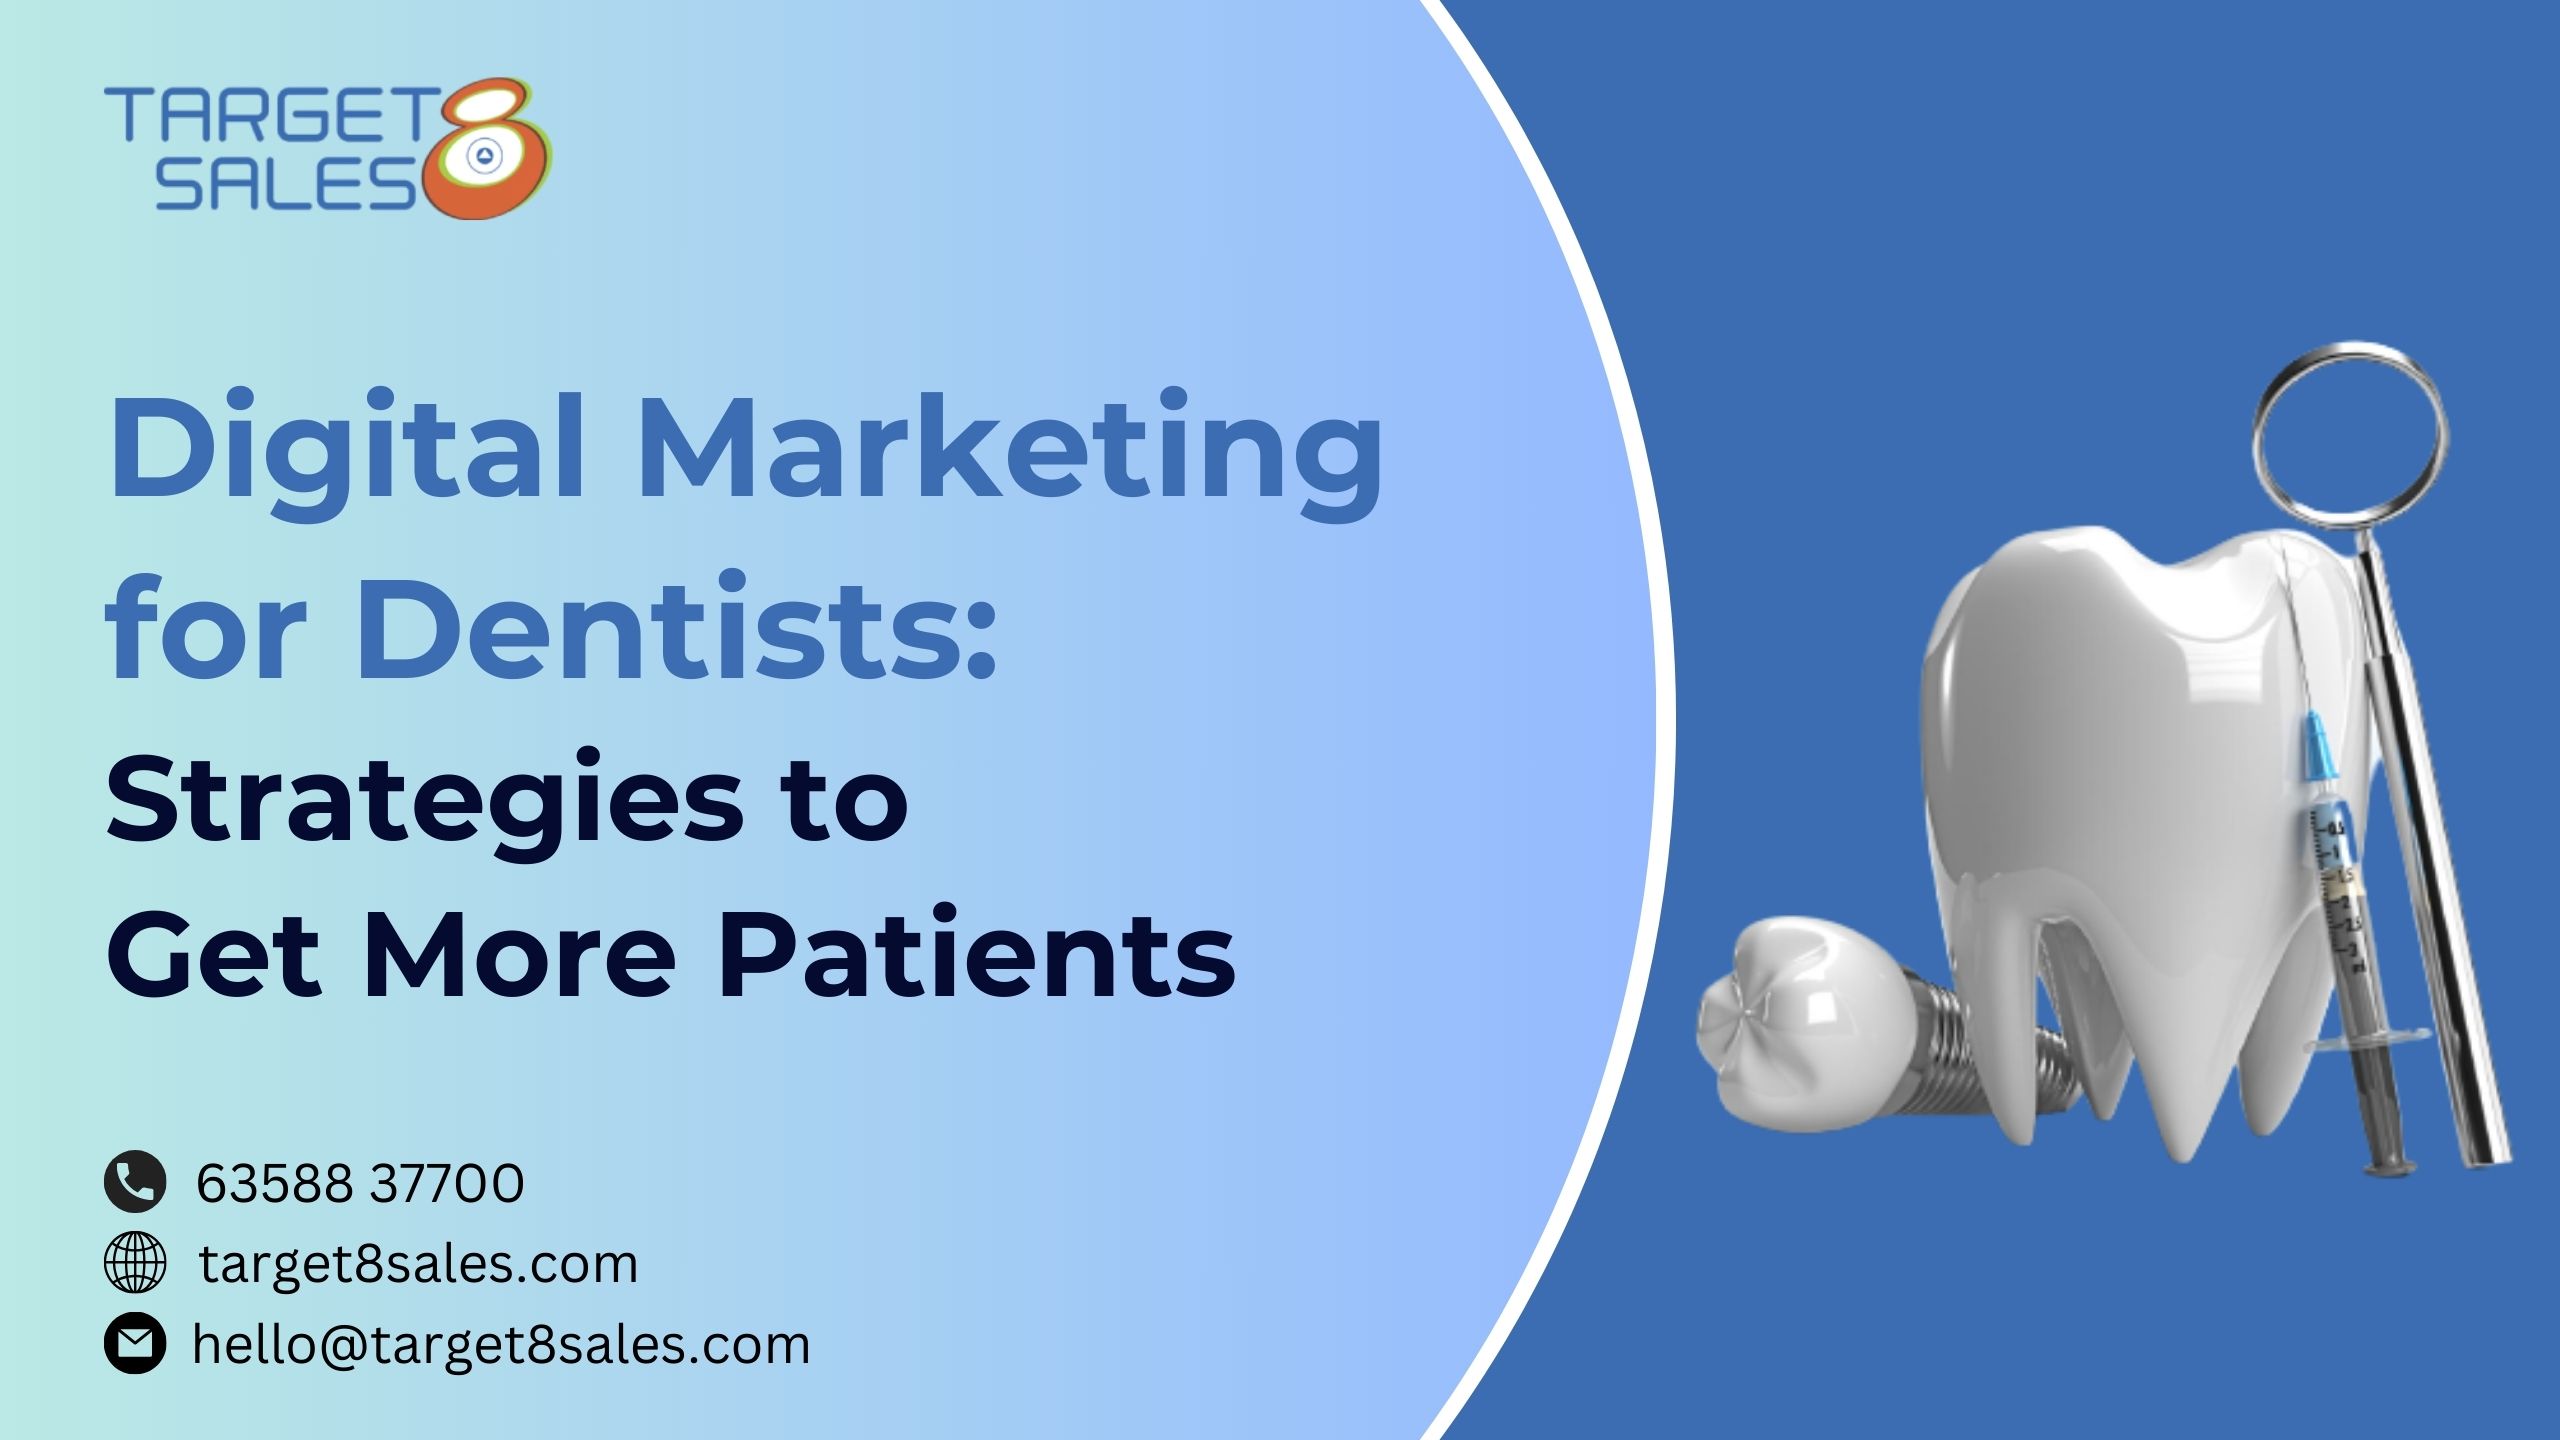 Digital Marketing for Dentists Strategies to Get More Patients